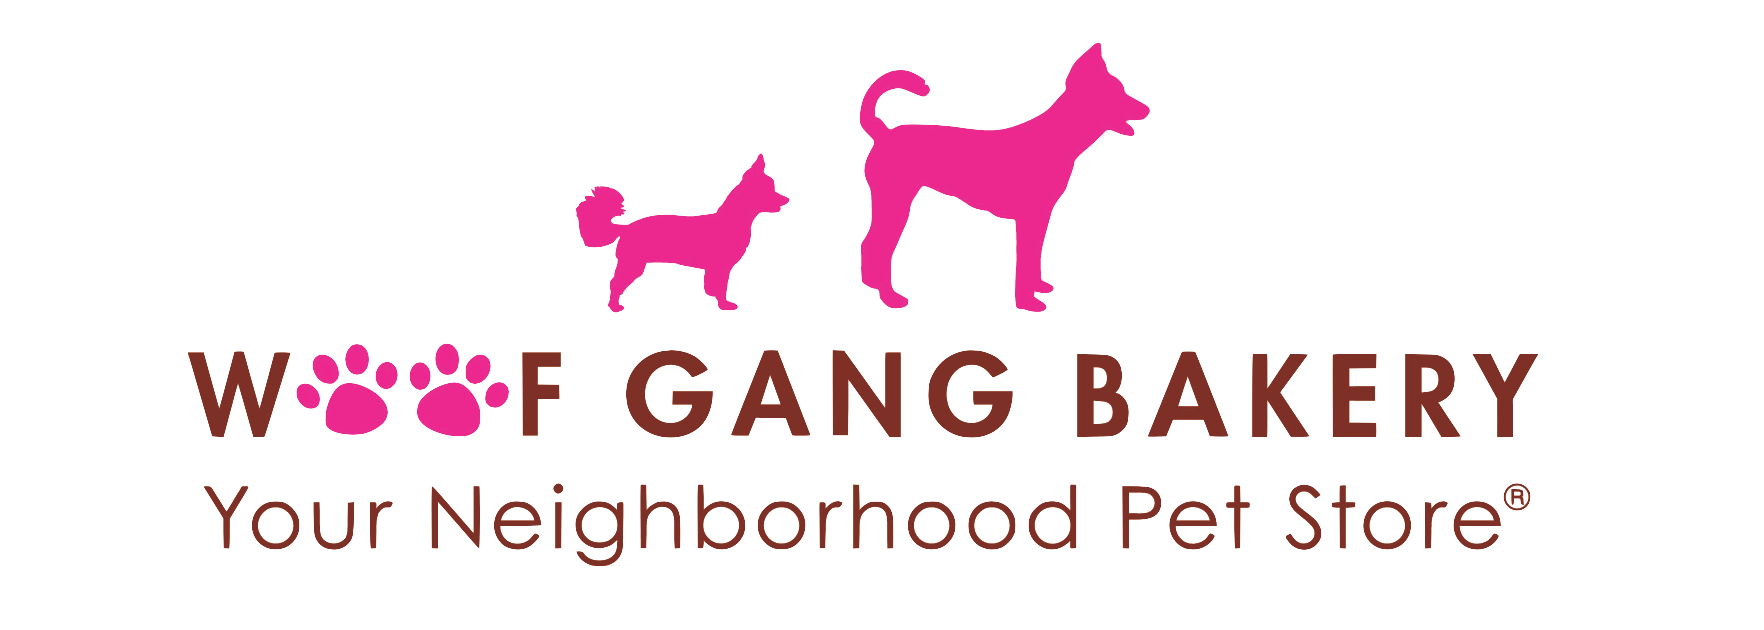 Woof Gang Bakery Opens New Boulder, CO Store